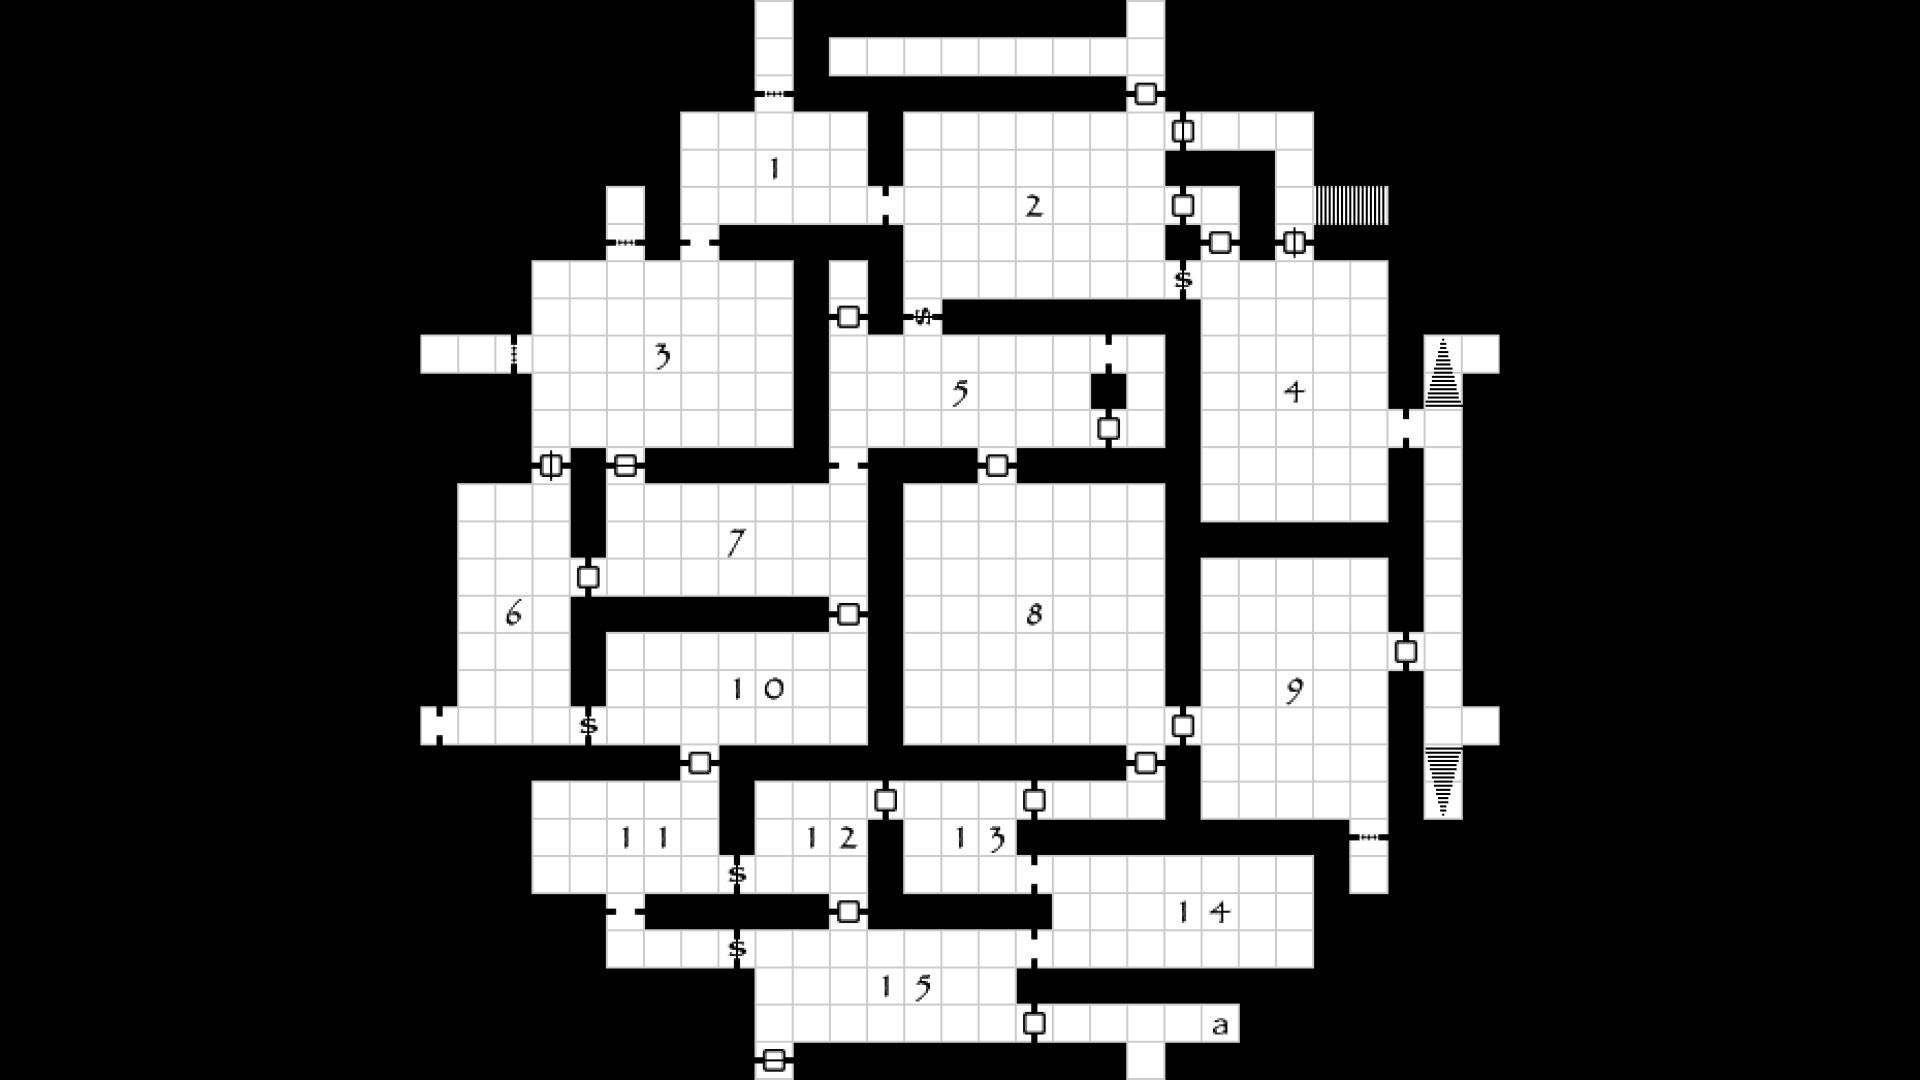 DnD dungeon generator map from Donjon